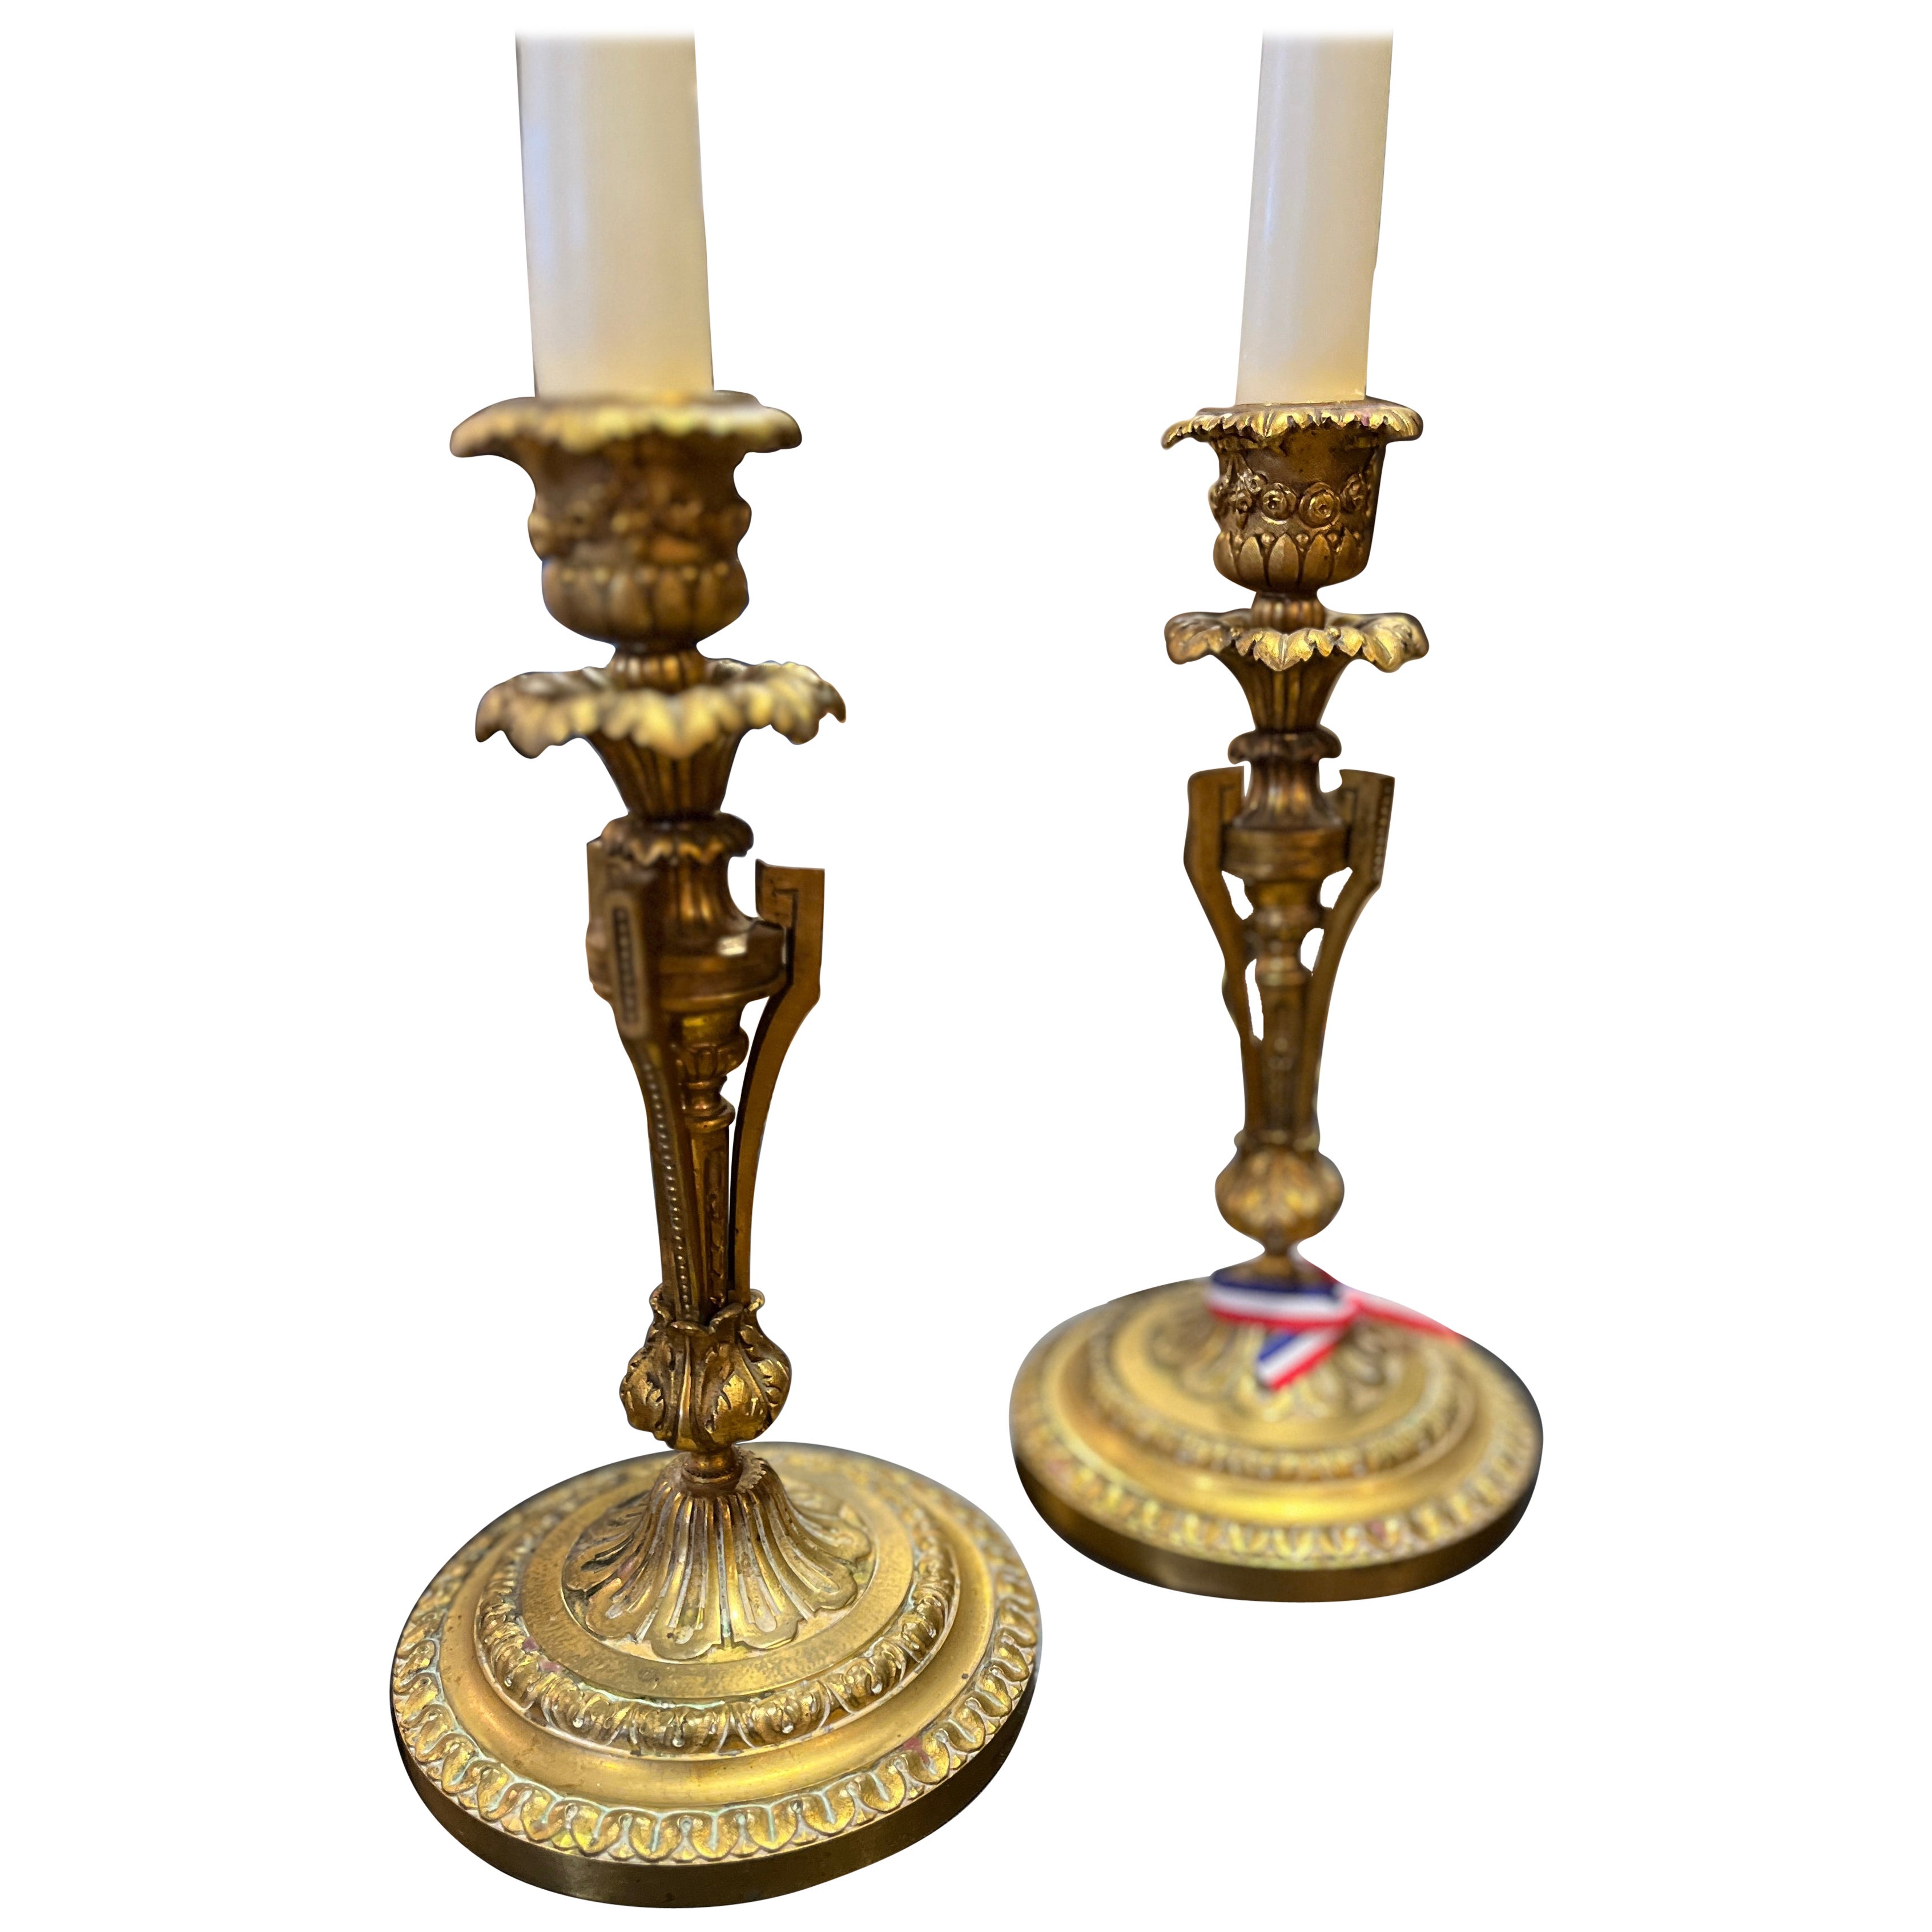 Antique French Ormalu Pair of Candleholder For Sale